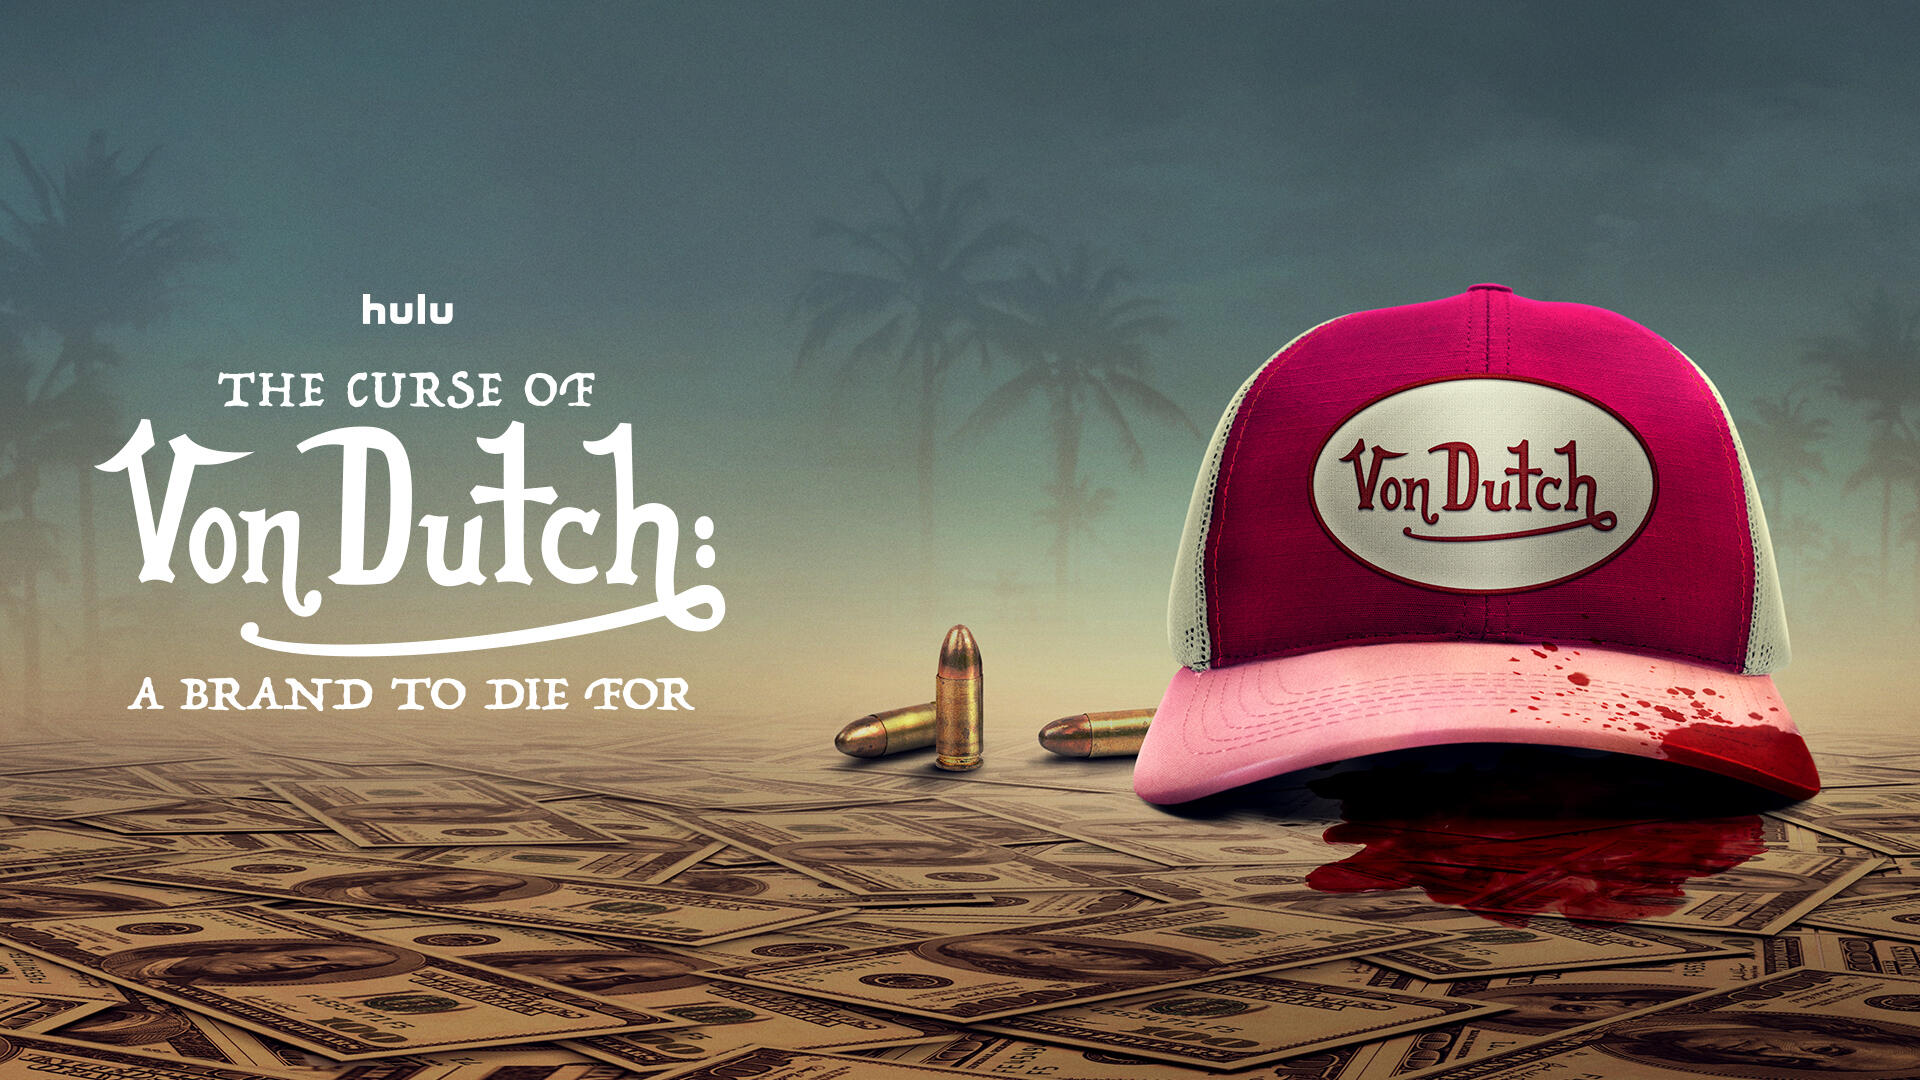 The Curse of Von Dutch: A Brand to Die For -- “The Curse of Von Dutch: A Brand to Die For” chronicles the unbelievable true story behind the rise and fall of the 2000s most iconic fashion trend. In this epic character-driven saga, Venice Beach surfers, gangsters, European garmentos and Hollywood movers and shakers all vie for control of the infamous brand — pushing it from obscurity to one of the most recognizable labels on Earth. After a decade of backstabbing, greed, and bloodshed, their lives – and pop culture – will never be the same. (Courtesy of Hulu)